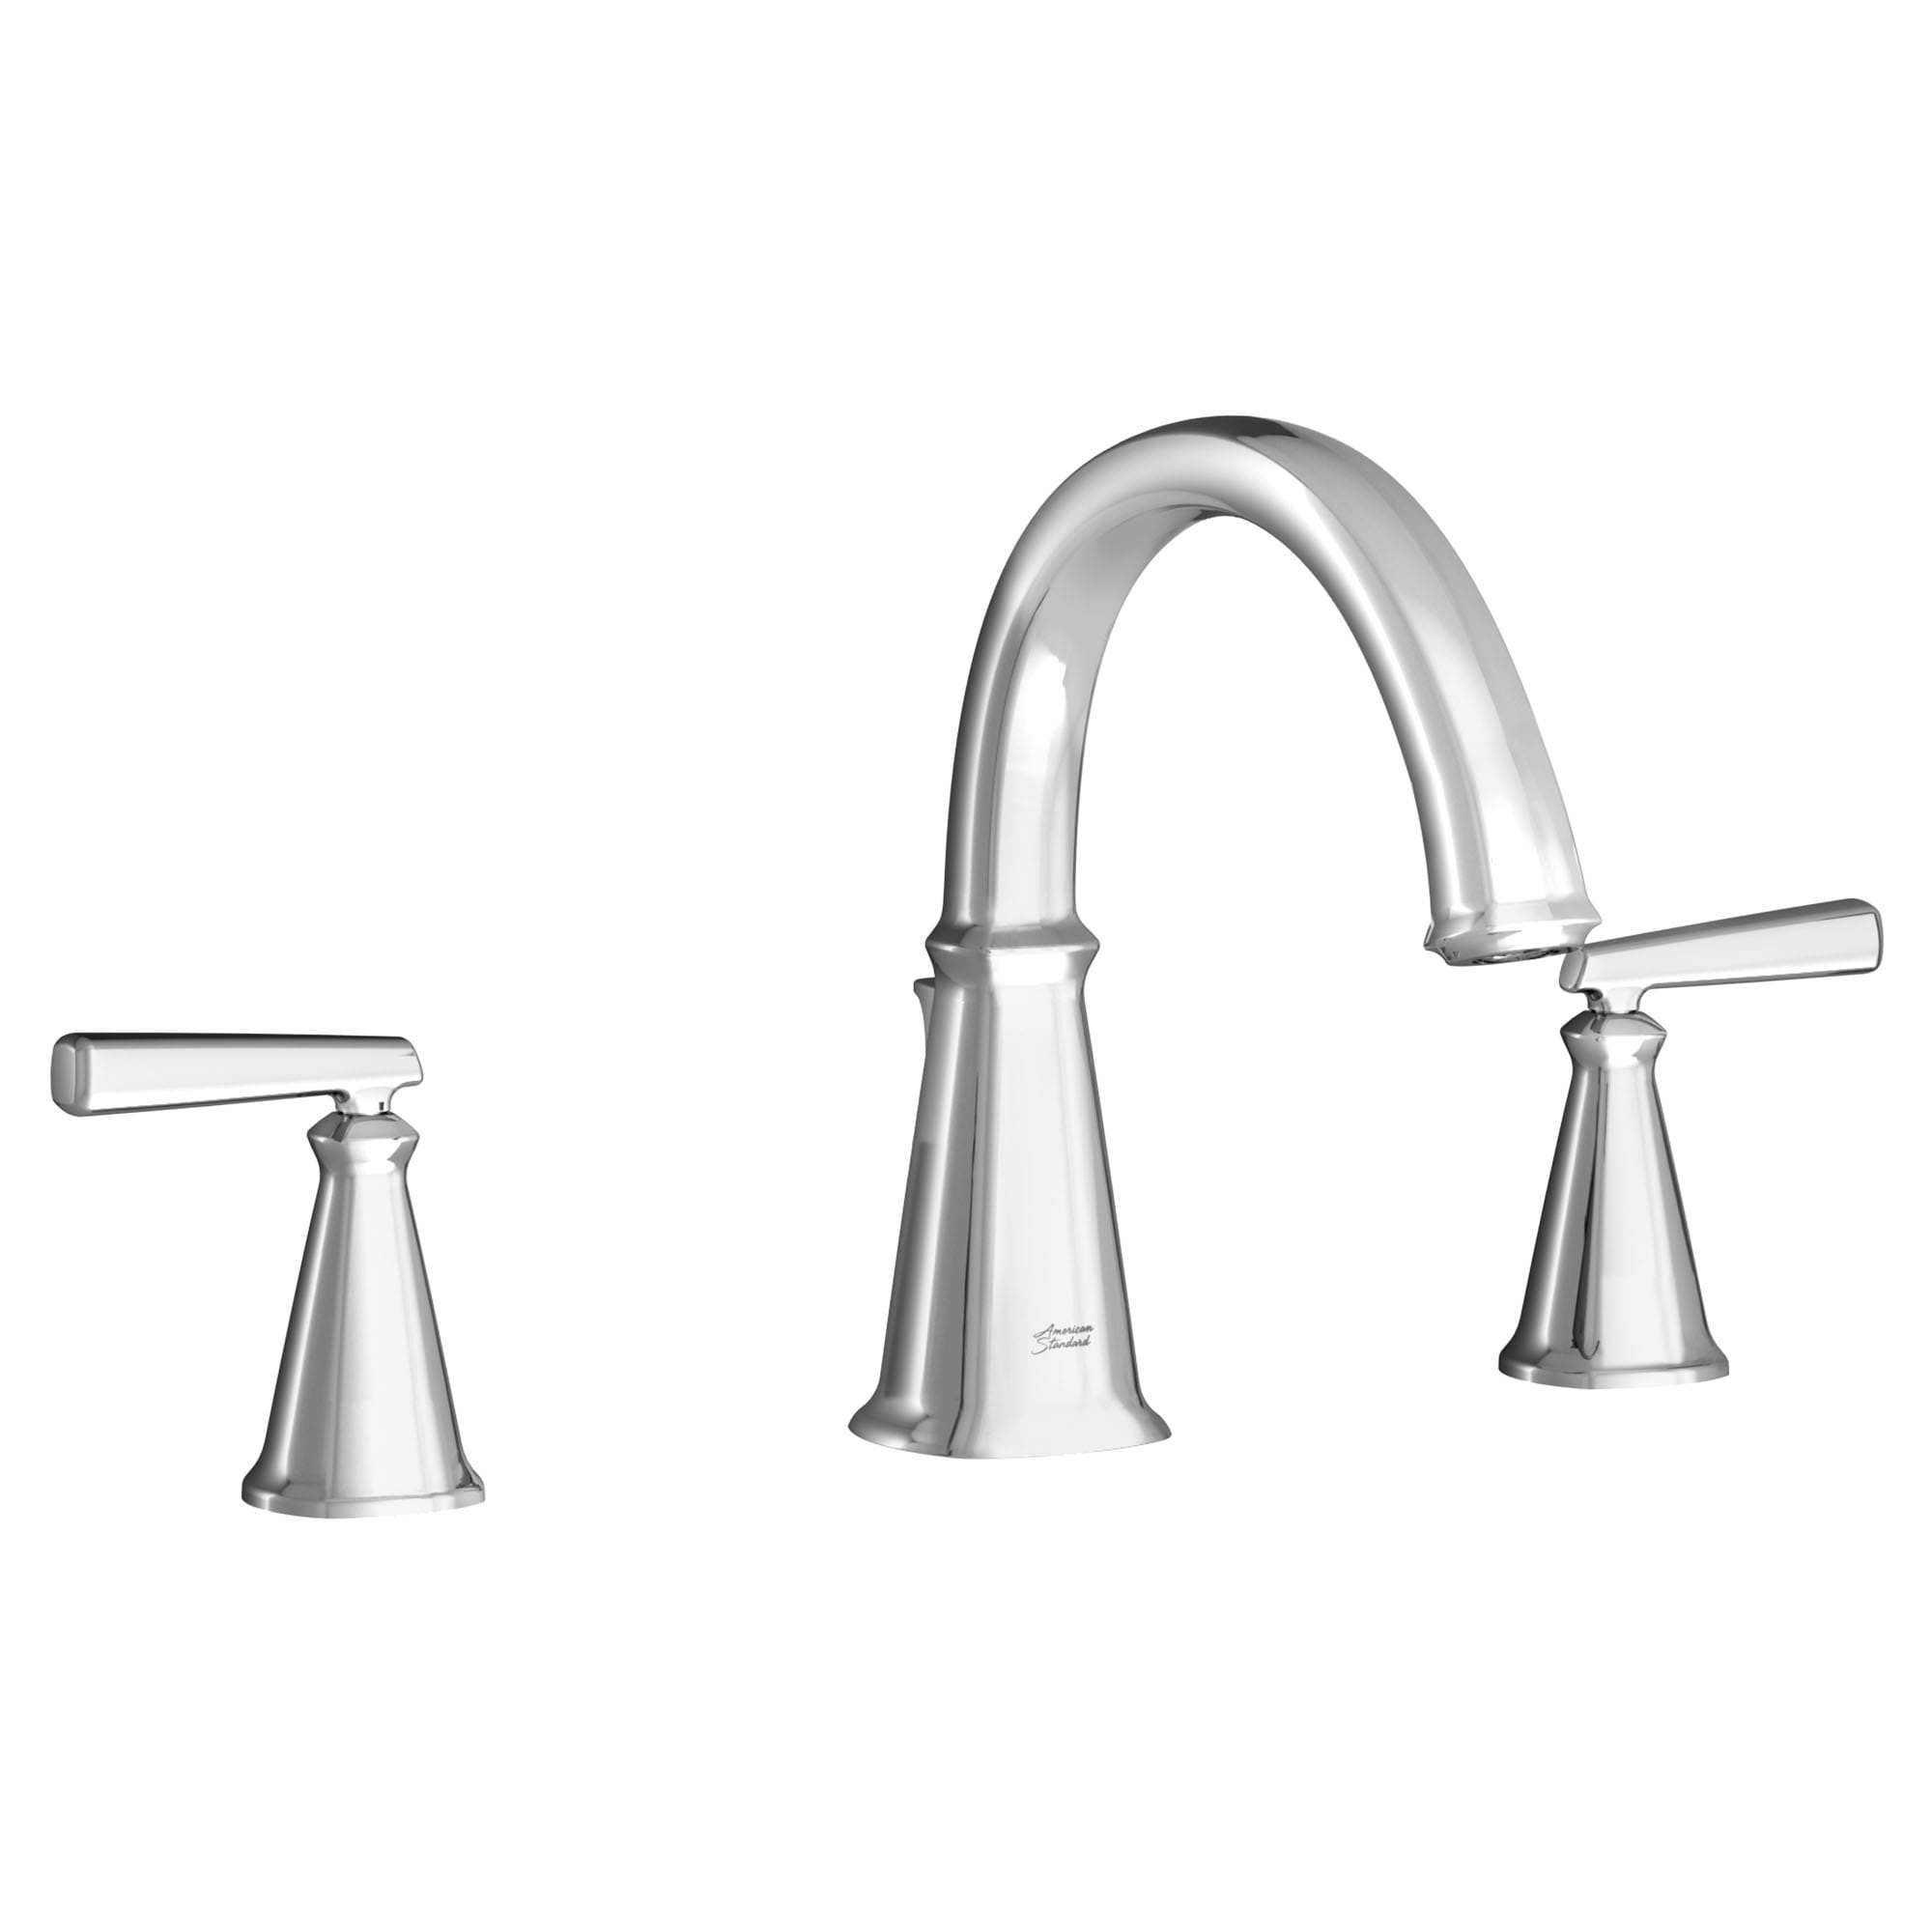 Edgemere® Bathtub Faucet With Lever Handles for Flash® Rough-In Valve